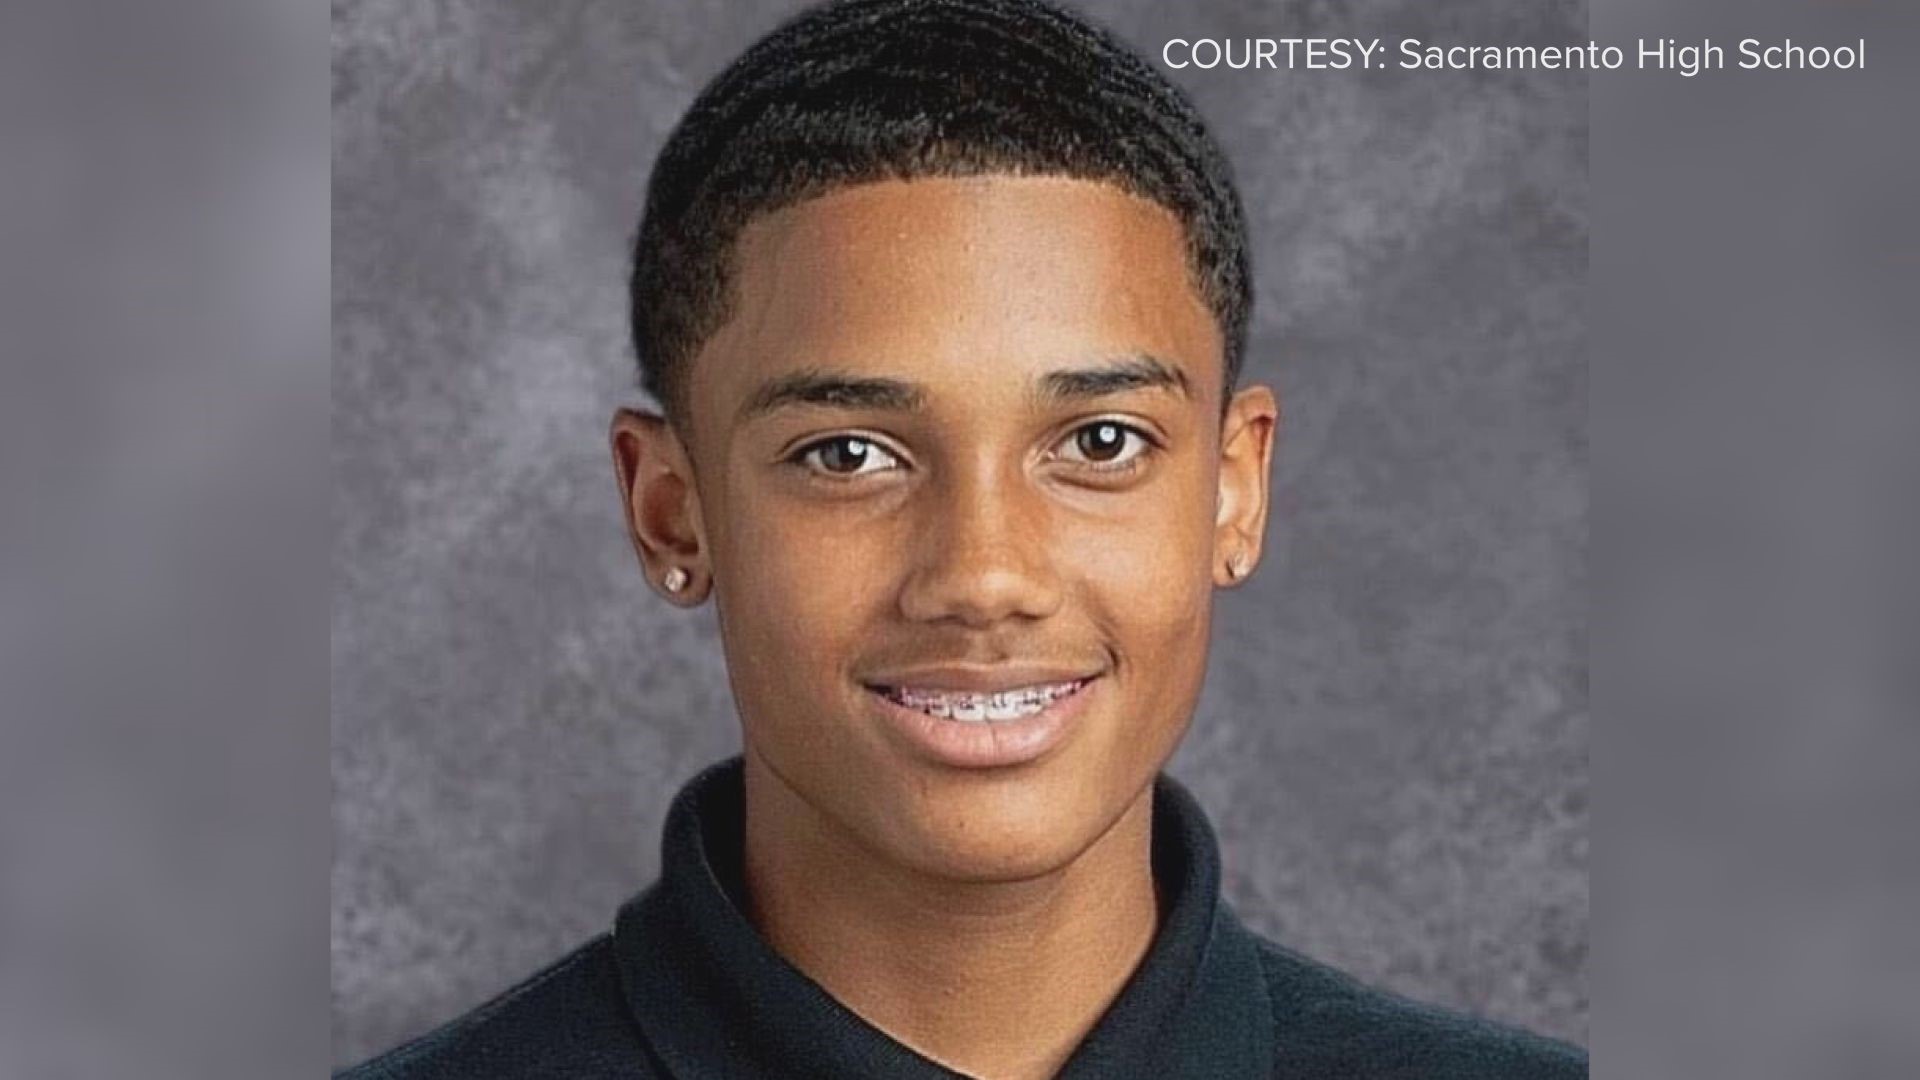 Jaylen Betschart, 17, was found dead from a gunshot wound in his car after it crashed into a power pole.